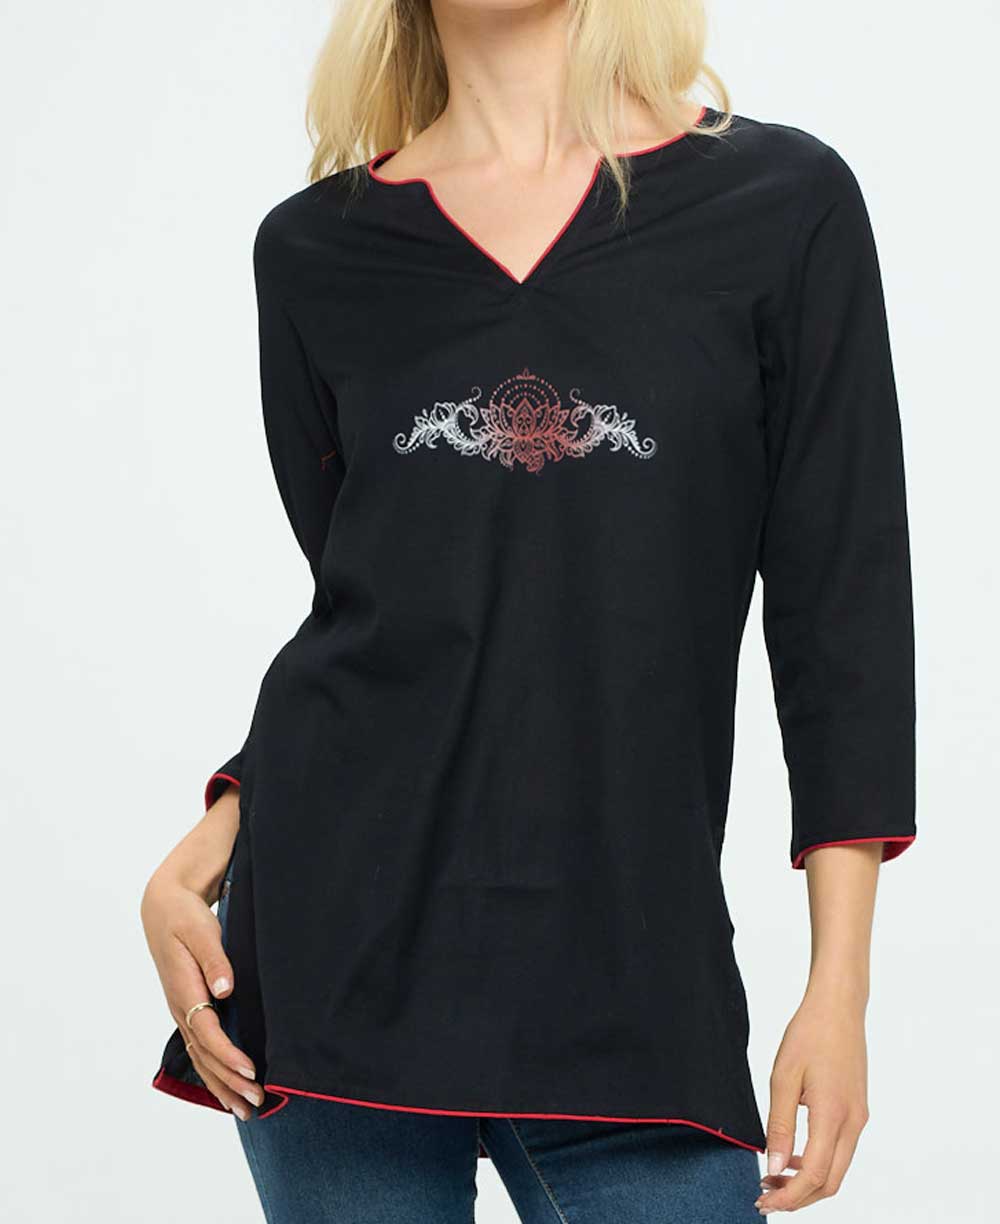 Black Cotton Tunic Top with Meaningful Lotus Design - Shirts & Tops S